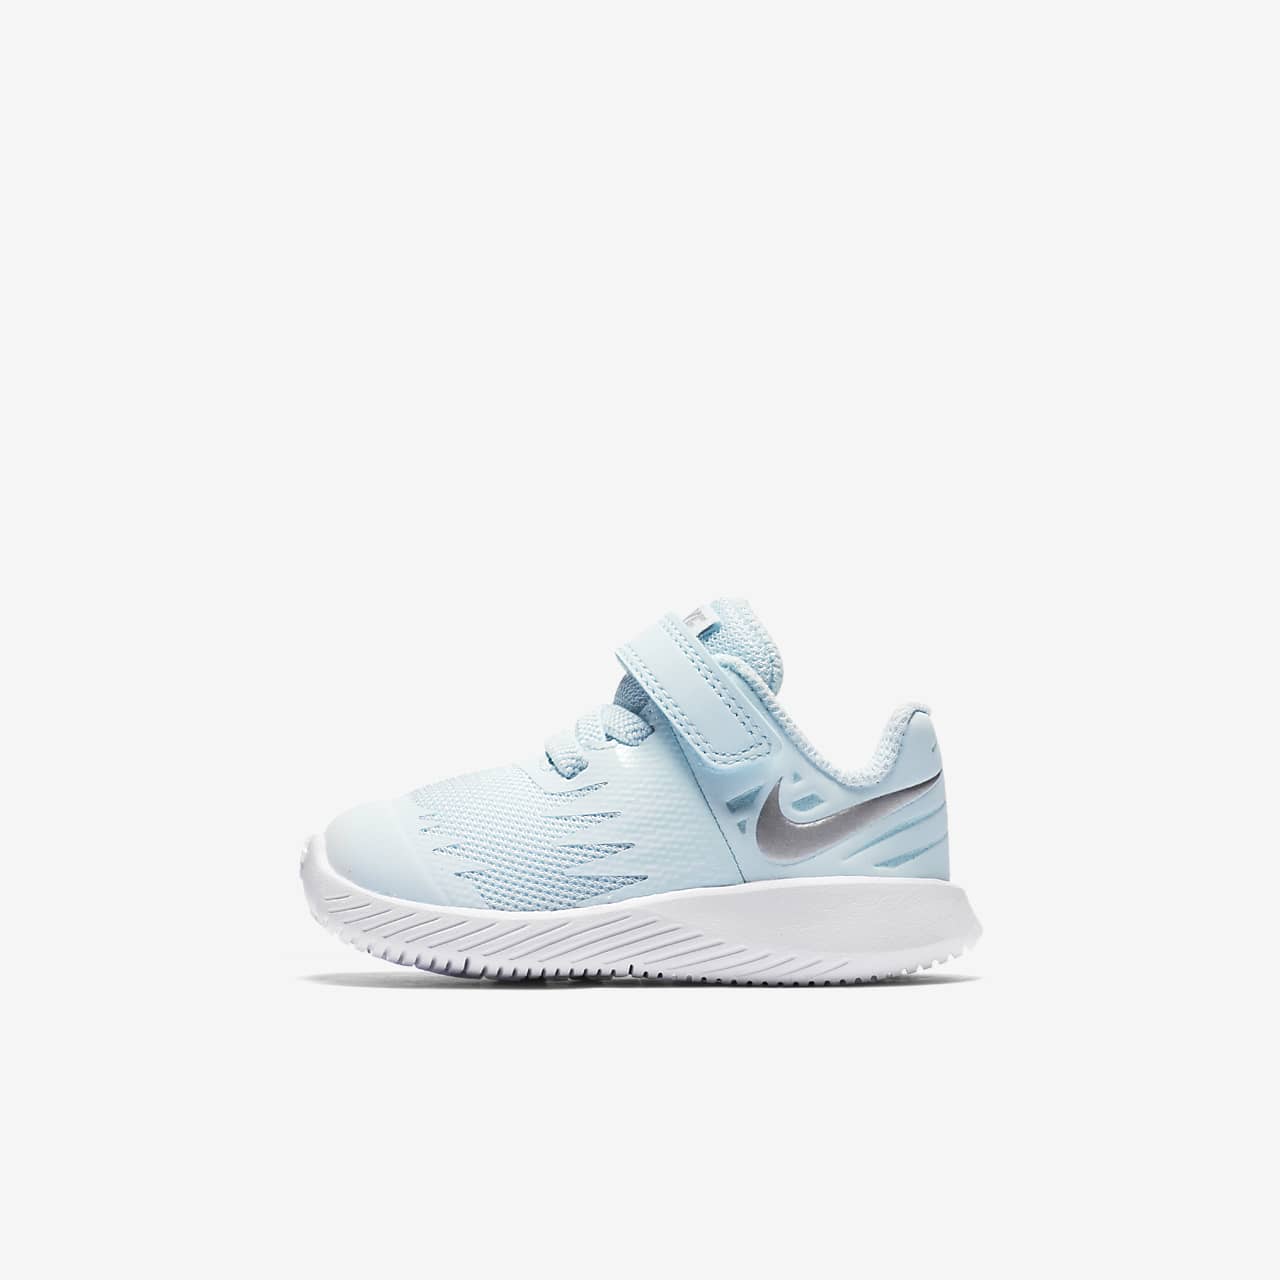 blue nike shoes for toddlers